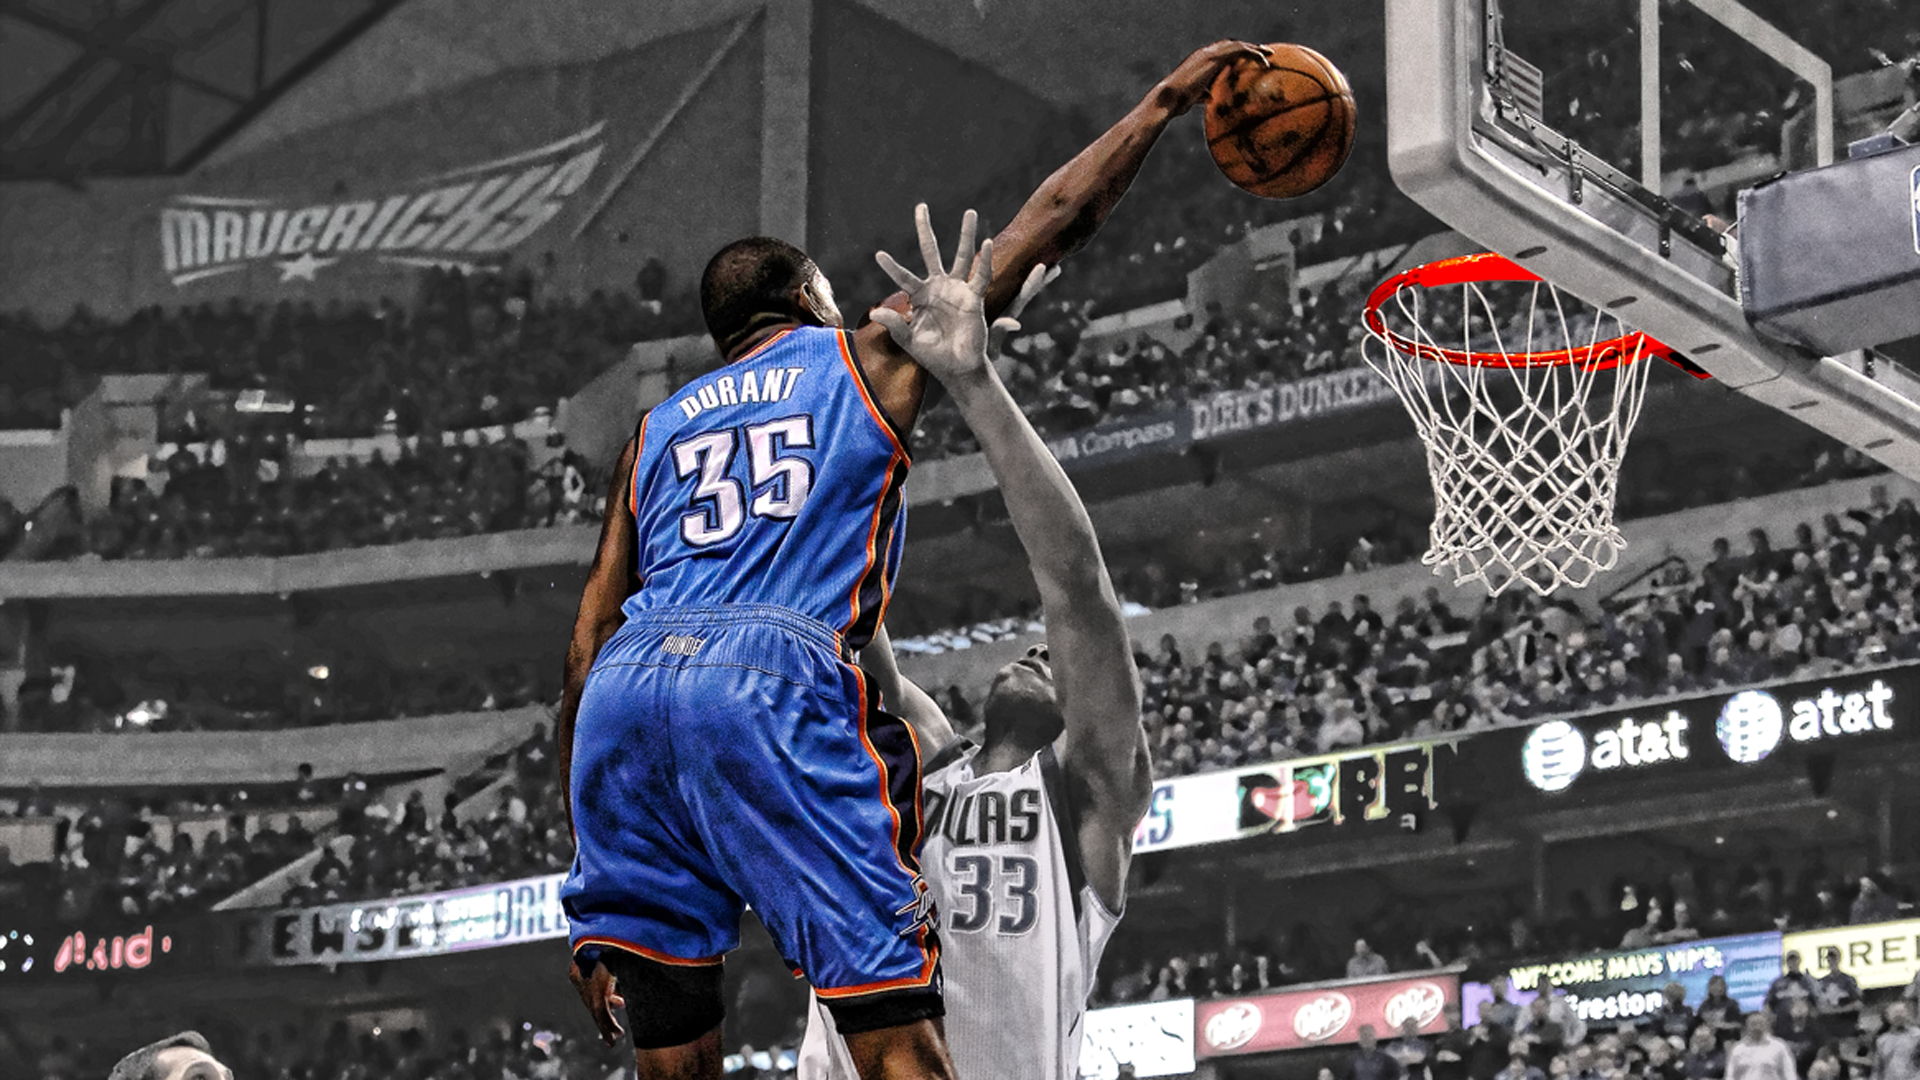 Sports Kevin Durant HD Wallpaper | Background Image